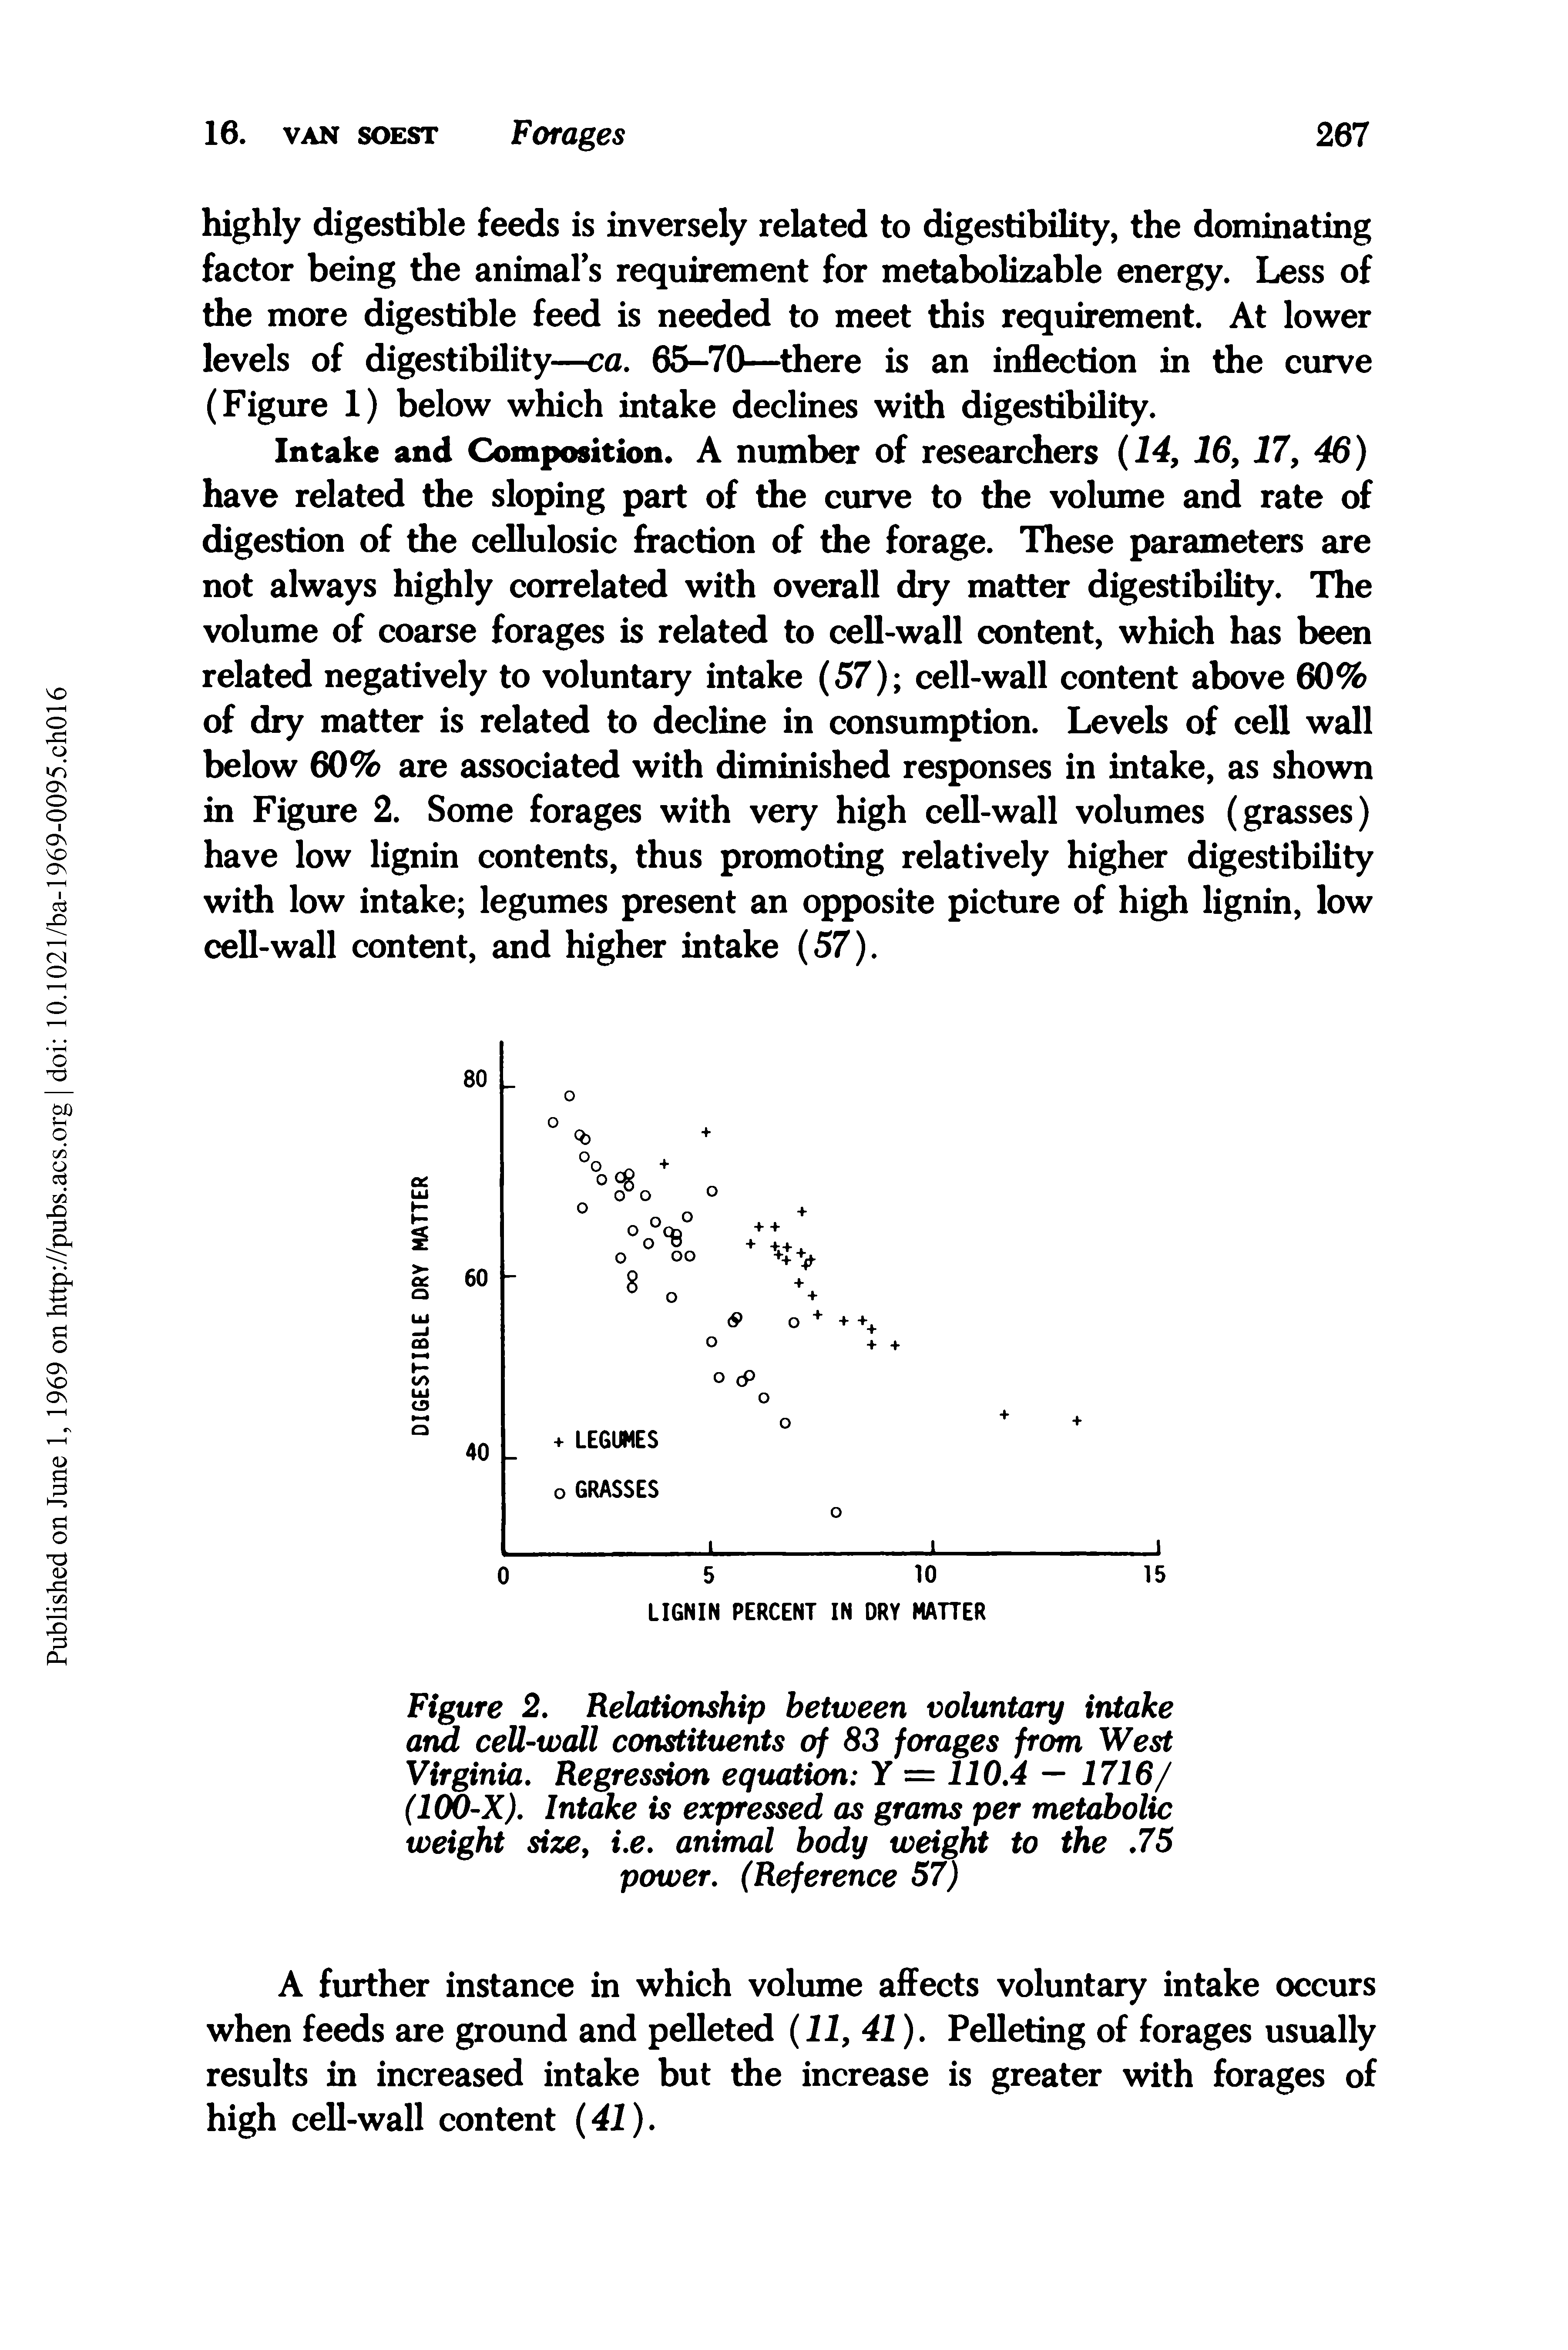 Figure 2. Relationship between voluntary intake and cell-wall constituents of 83 forages from West Virginia. Regression equation Y == 110.4 — 1716/ (100-X). Intake is expressed as grams per metabolic weight size, i.e. animal body weight to the. 75 power. (Reference 57)...